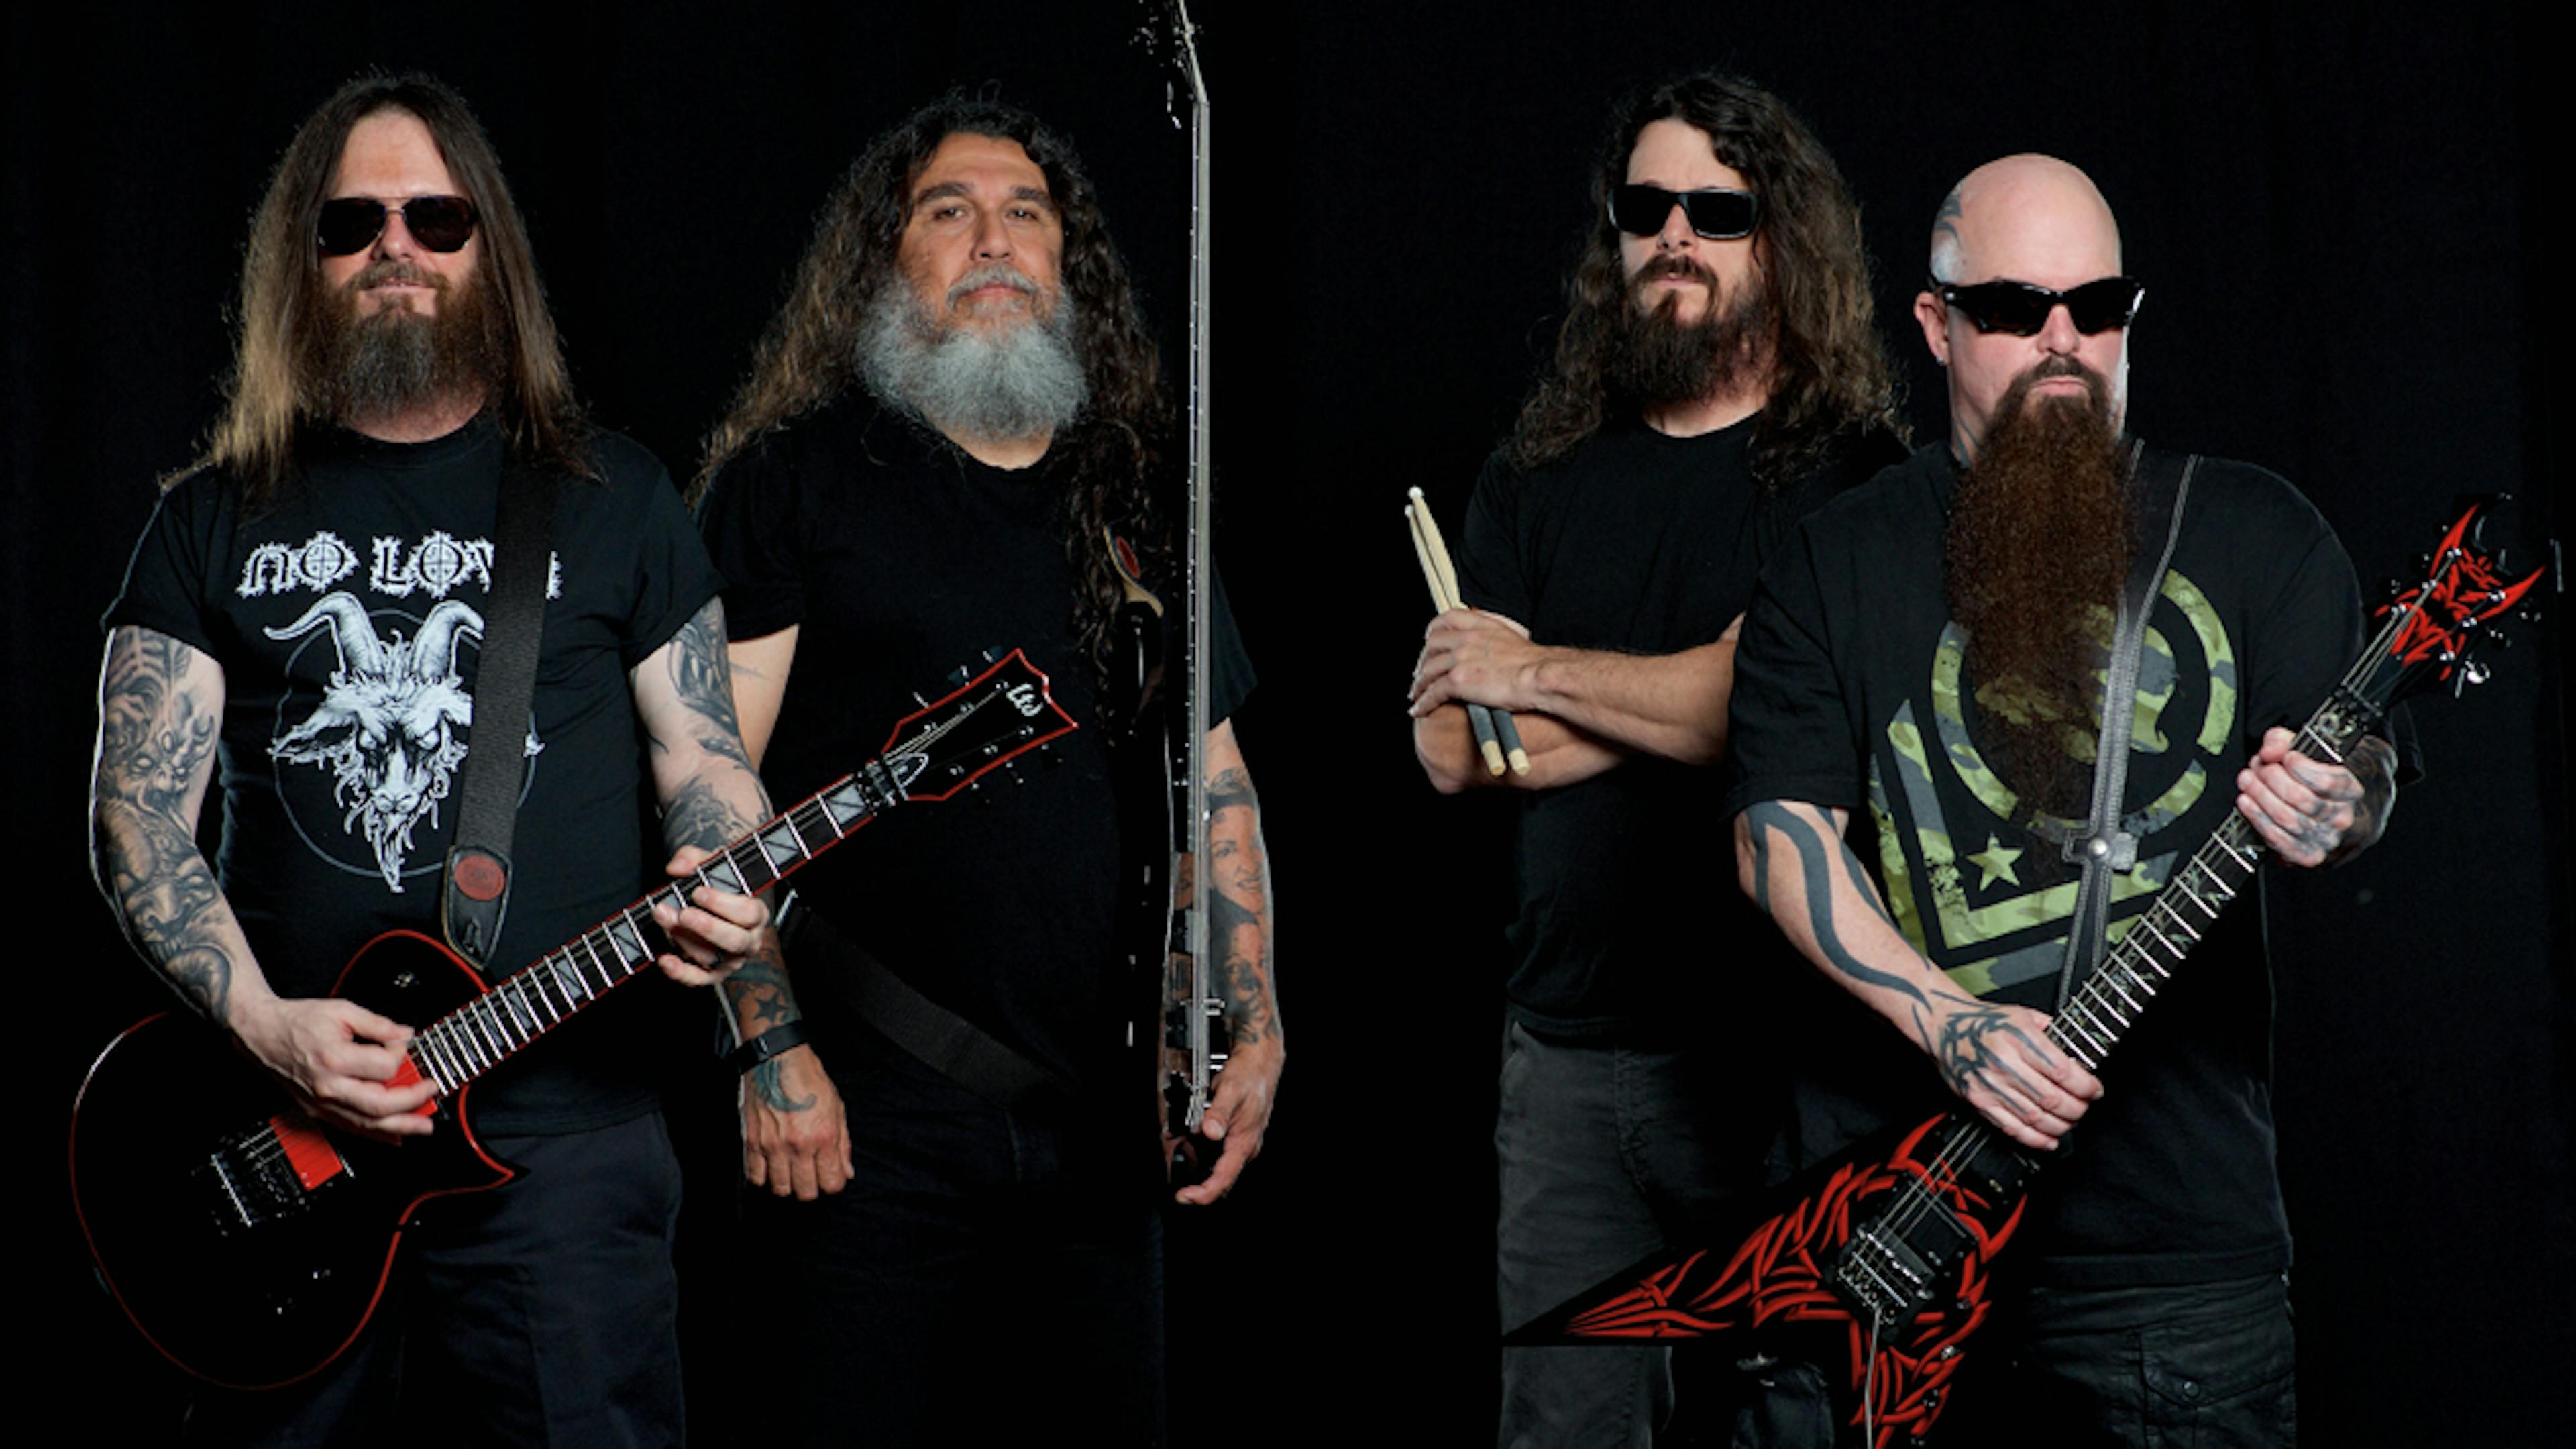 Slayer And Anthrax's Christchurch Show Canceled After Mosque Shootings